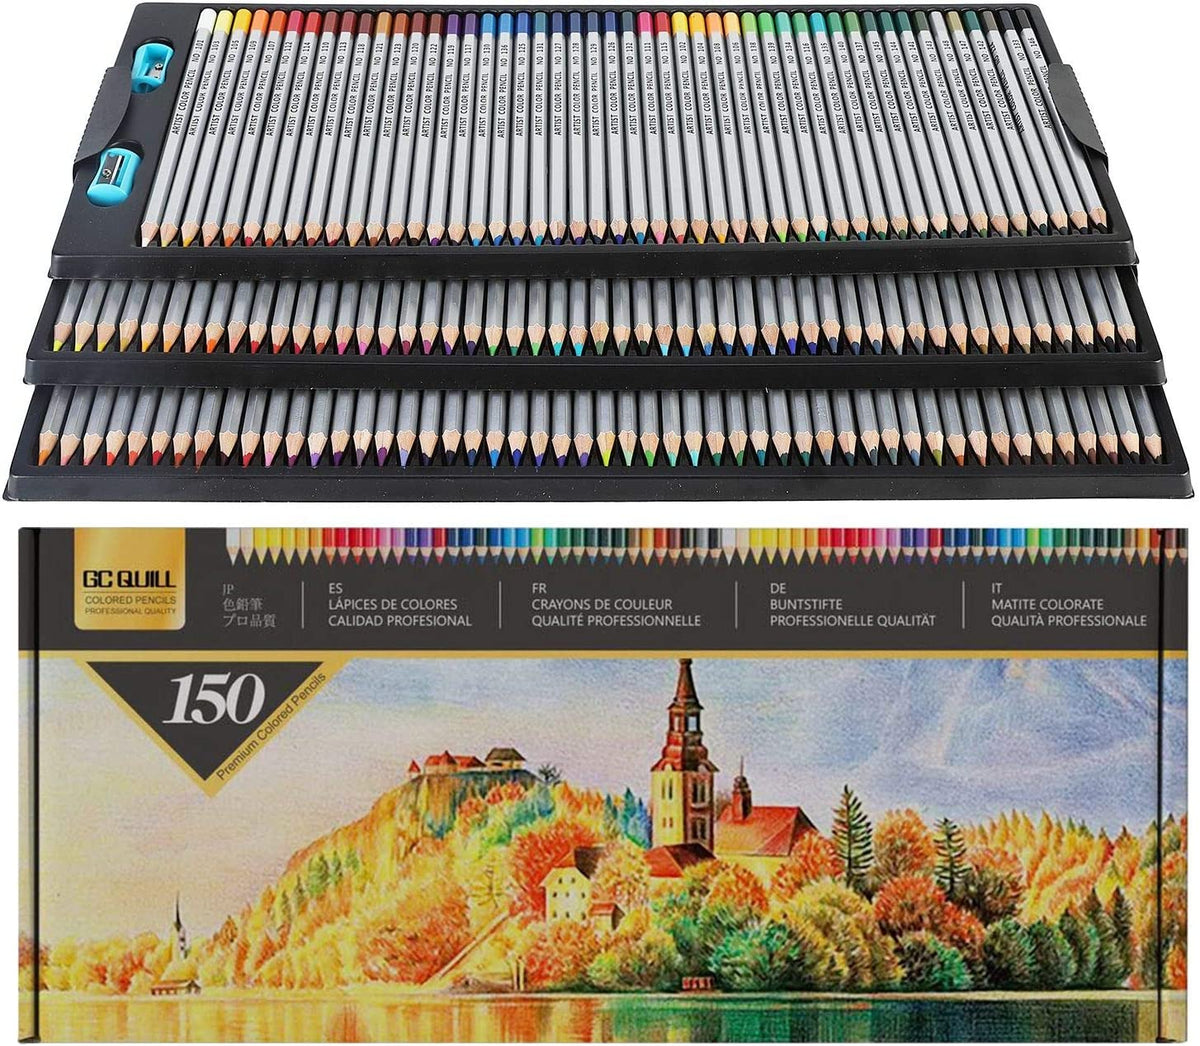 Colouring Pencils-150 Colored Pencils Drawing Set- Art Pencils for Colouring, Drawing, Sketching, Shading, Blending-for Adults, Children, Professional Artists GC-CP-150